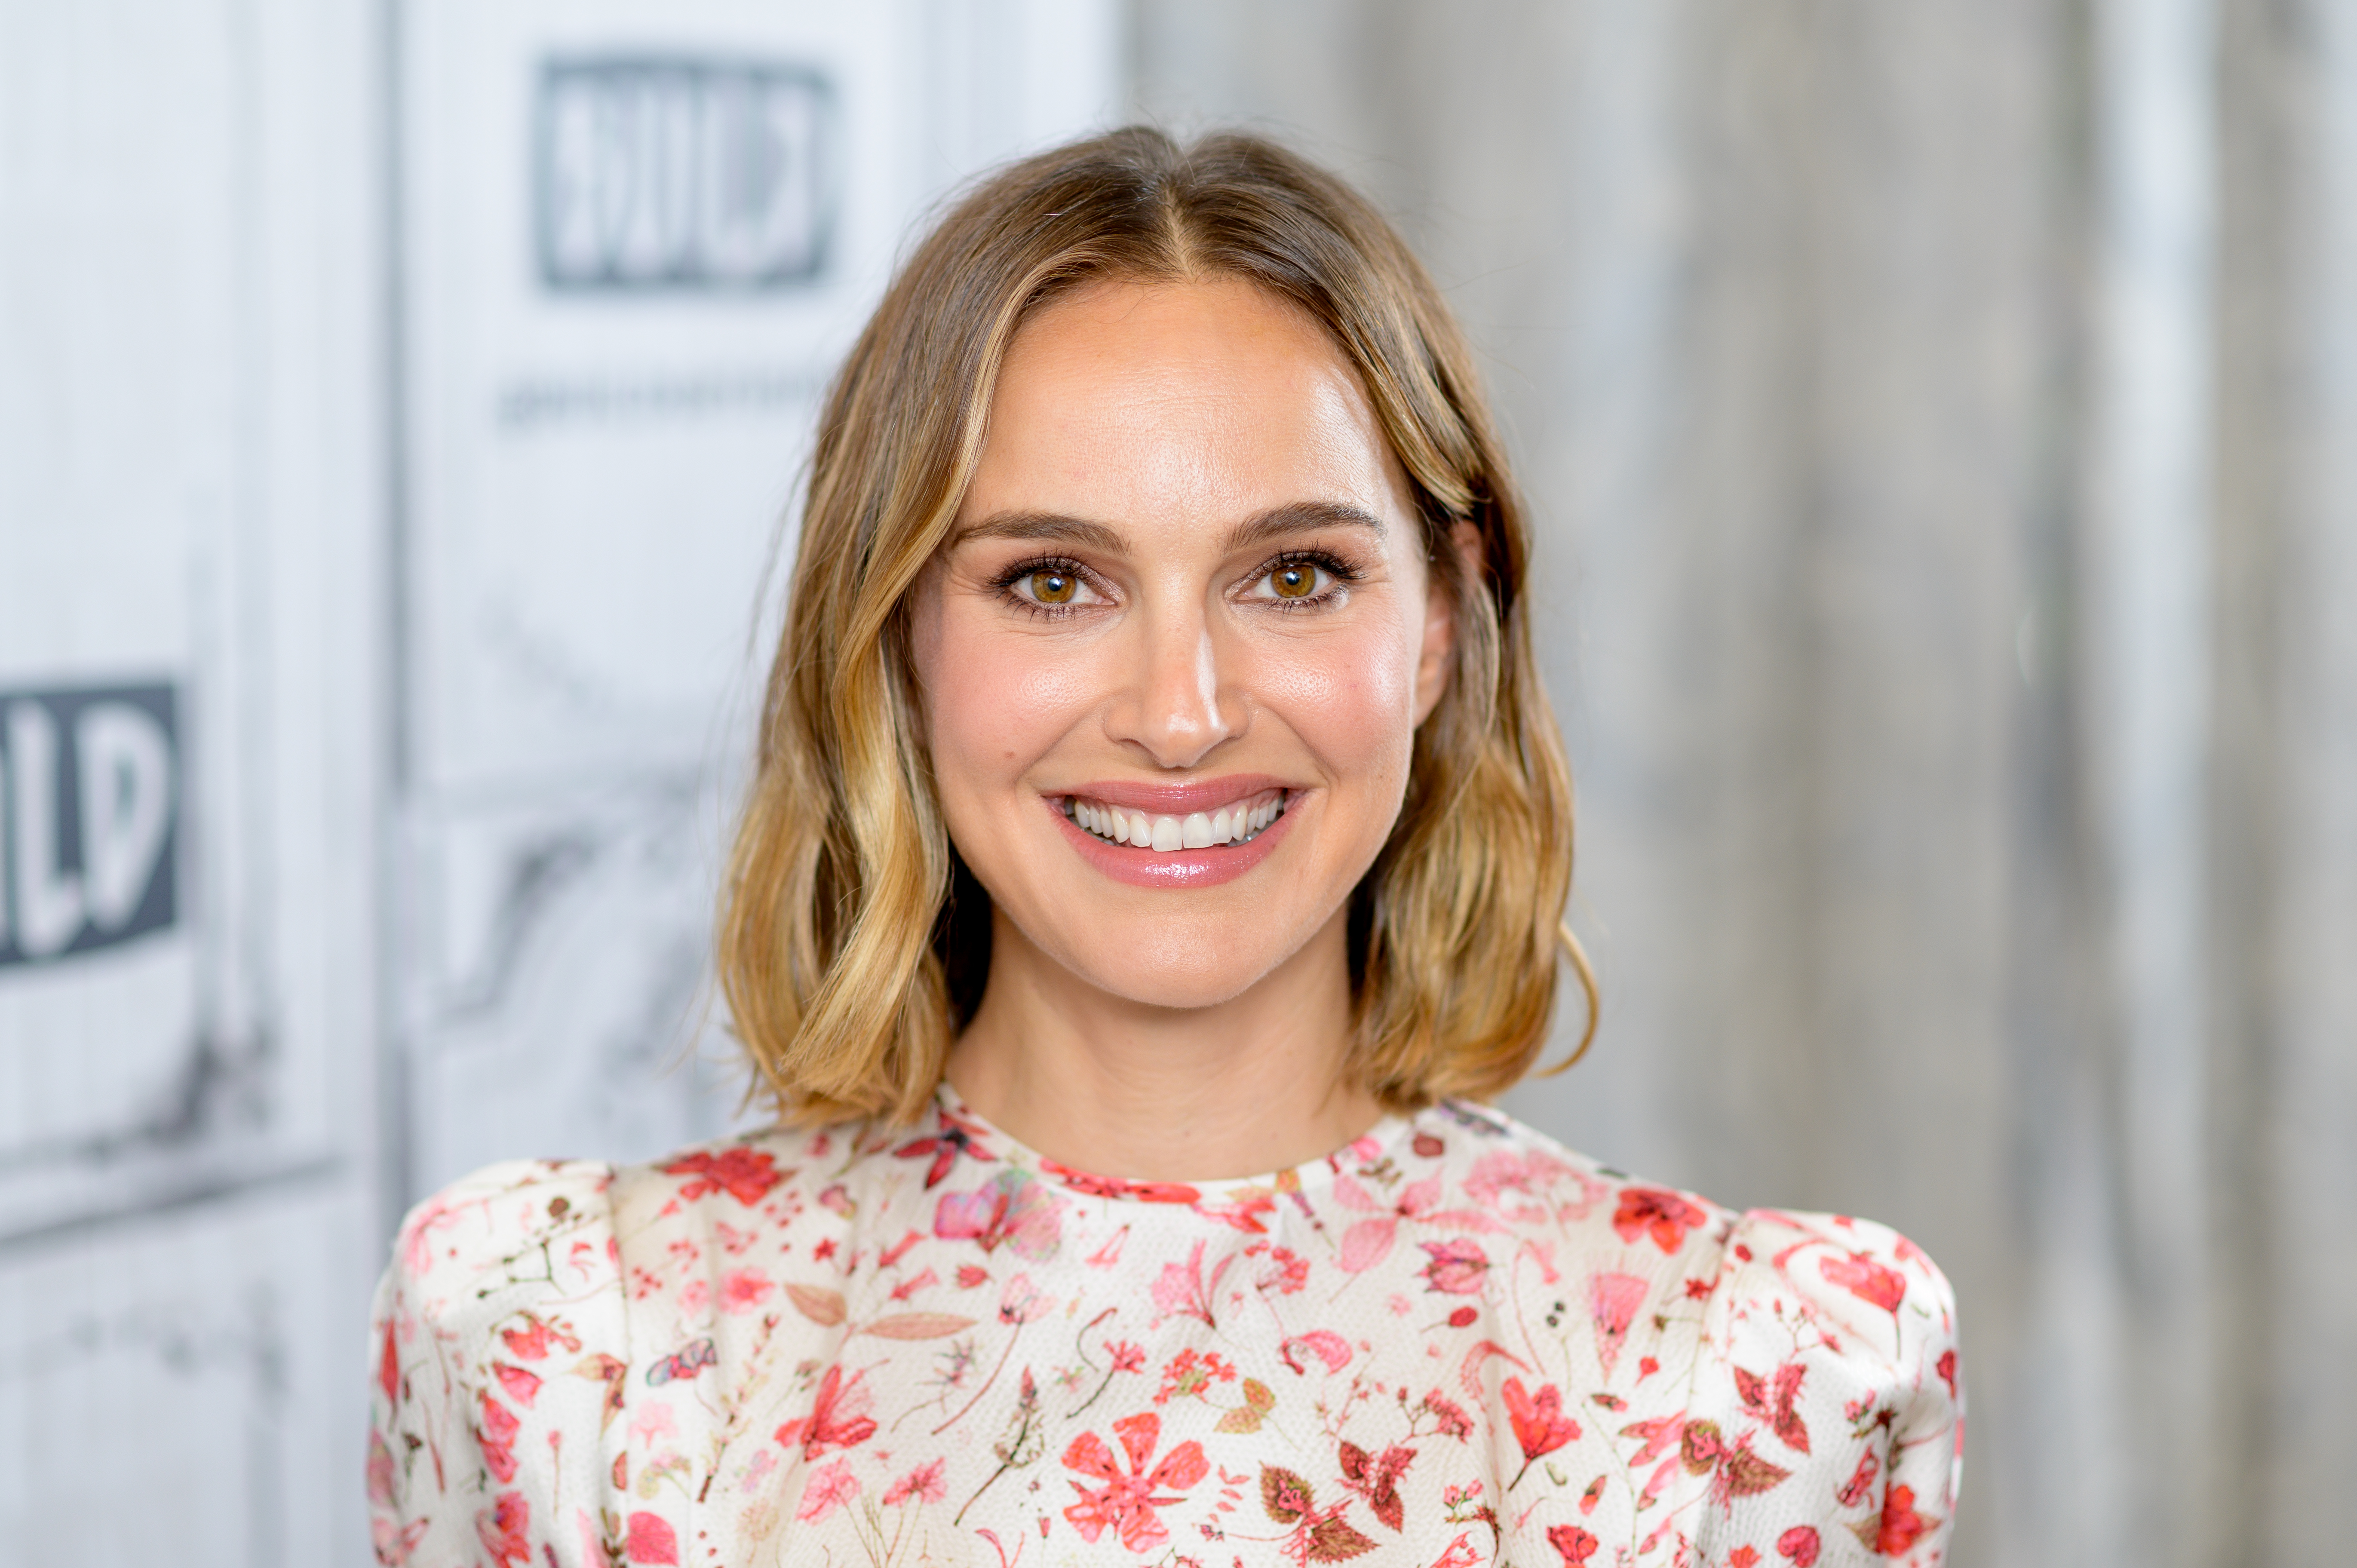 Natalie Portman on the Build Series at Build Studio on October 02, 2019 | Source: Getty Images